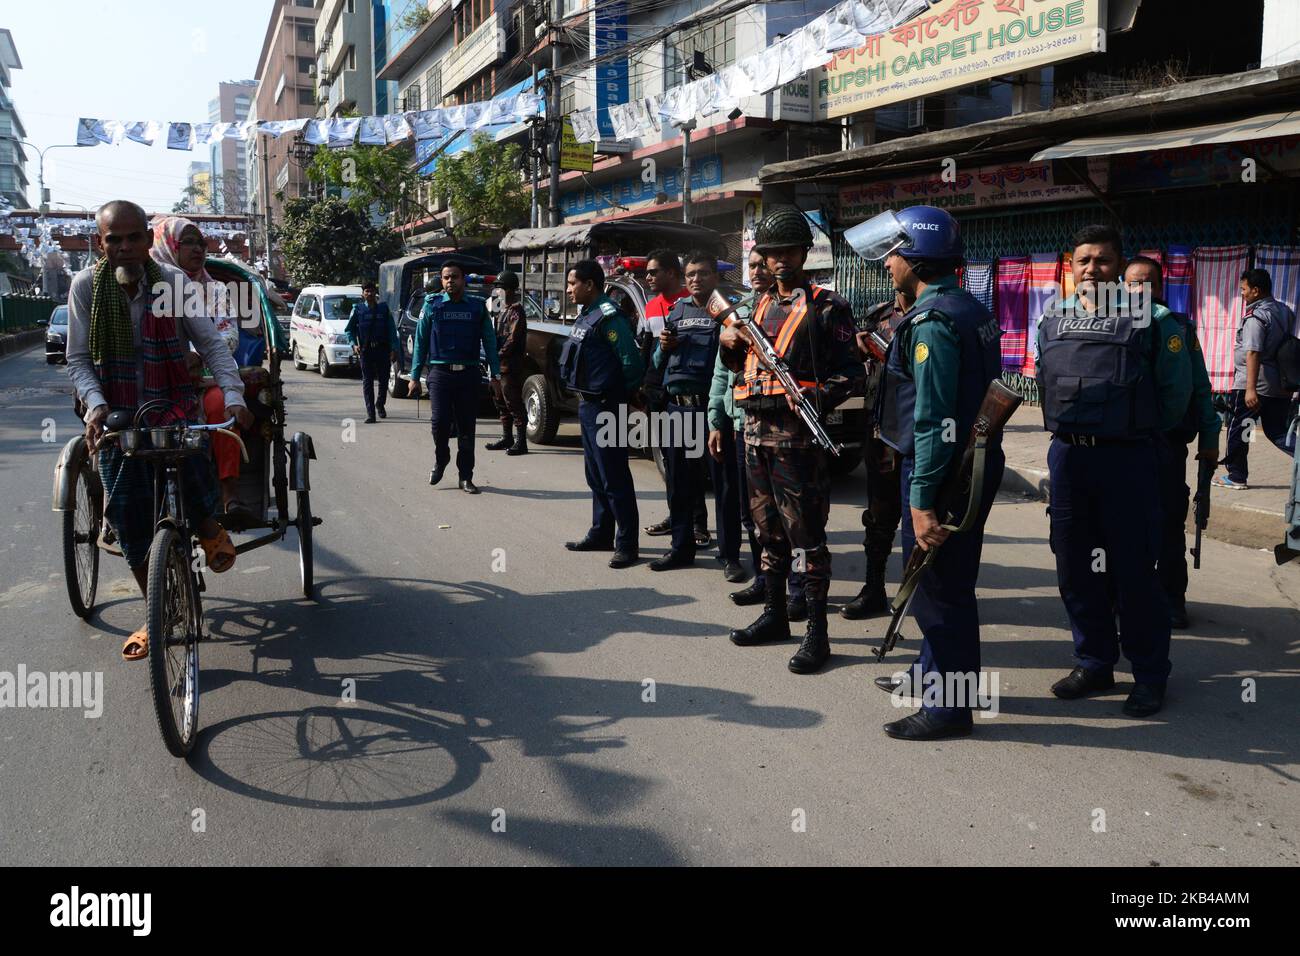 Members of Border Guard Bangladesh (BGB) and Police stand guard in a street for the upcoming election in Dhaka, Bangladesh on December 28, 2018. Election security duties have started to help ensure a peaceful atmosphere and maintain law and order across the country for the 30 December polls. According to the Bangladesh Election Commission, the 11th general election is scheduled on 30 December 2018 to select members of the national parliament in Bangladesh. (Photo by Mamunur Rashid/NurPhoto) Stock Photo